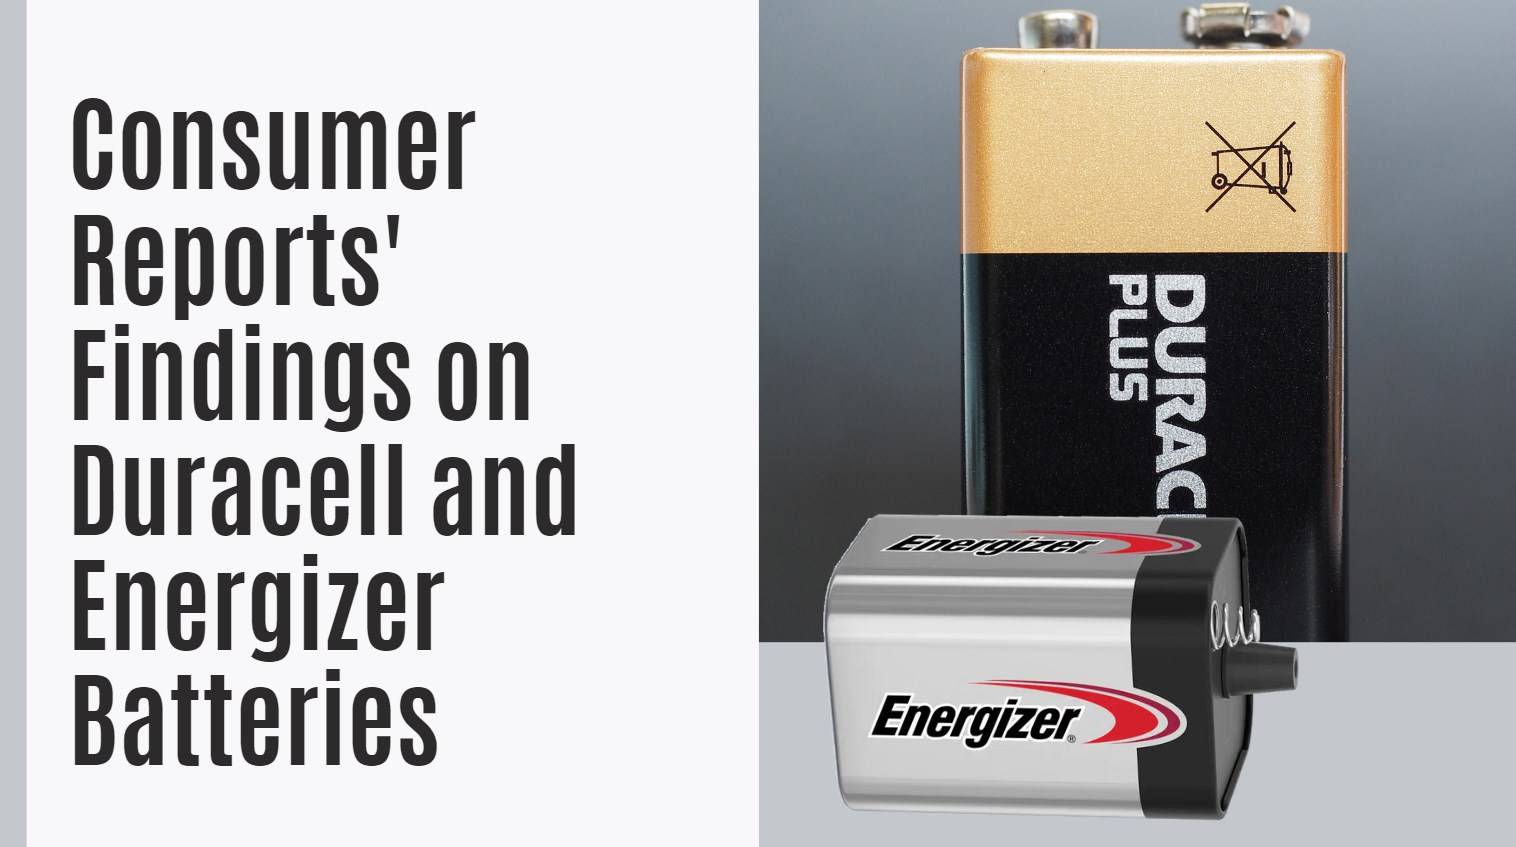 Consumer Reports' Findings on Duracell and Energizer Batteries. Which lasts longer Duracell or Energizer batteries?